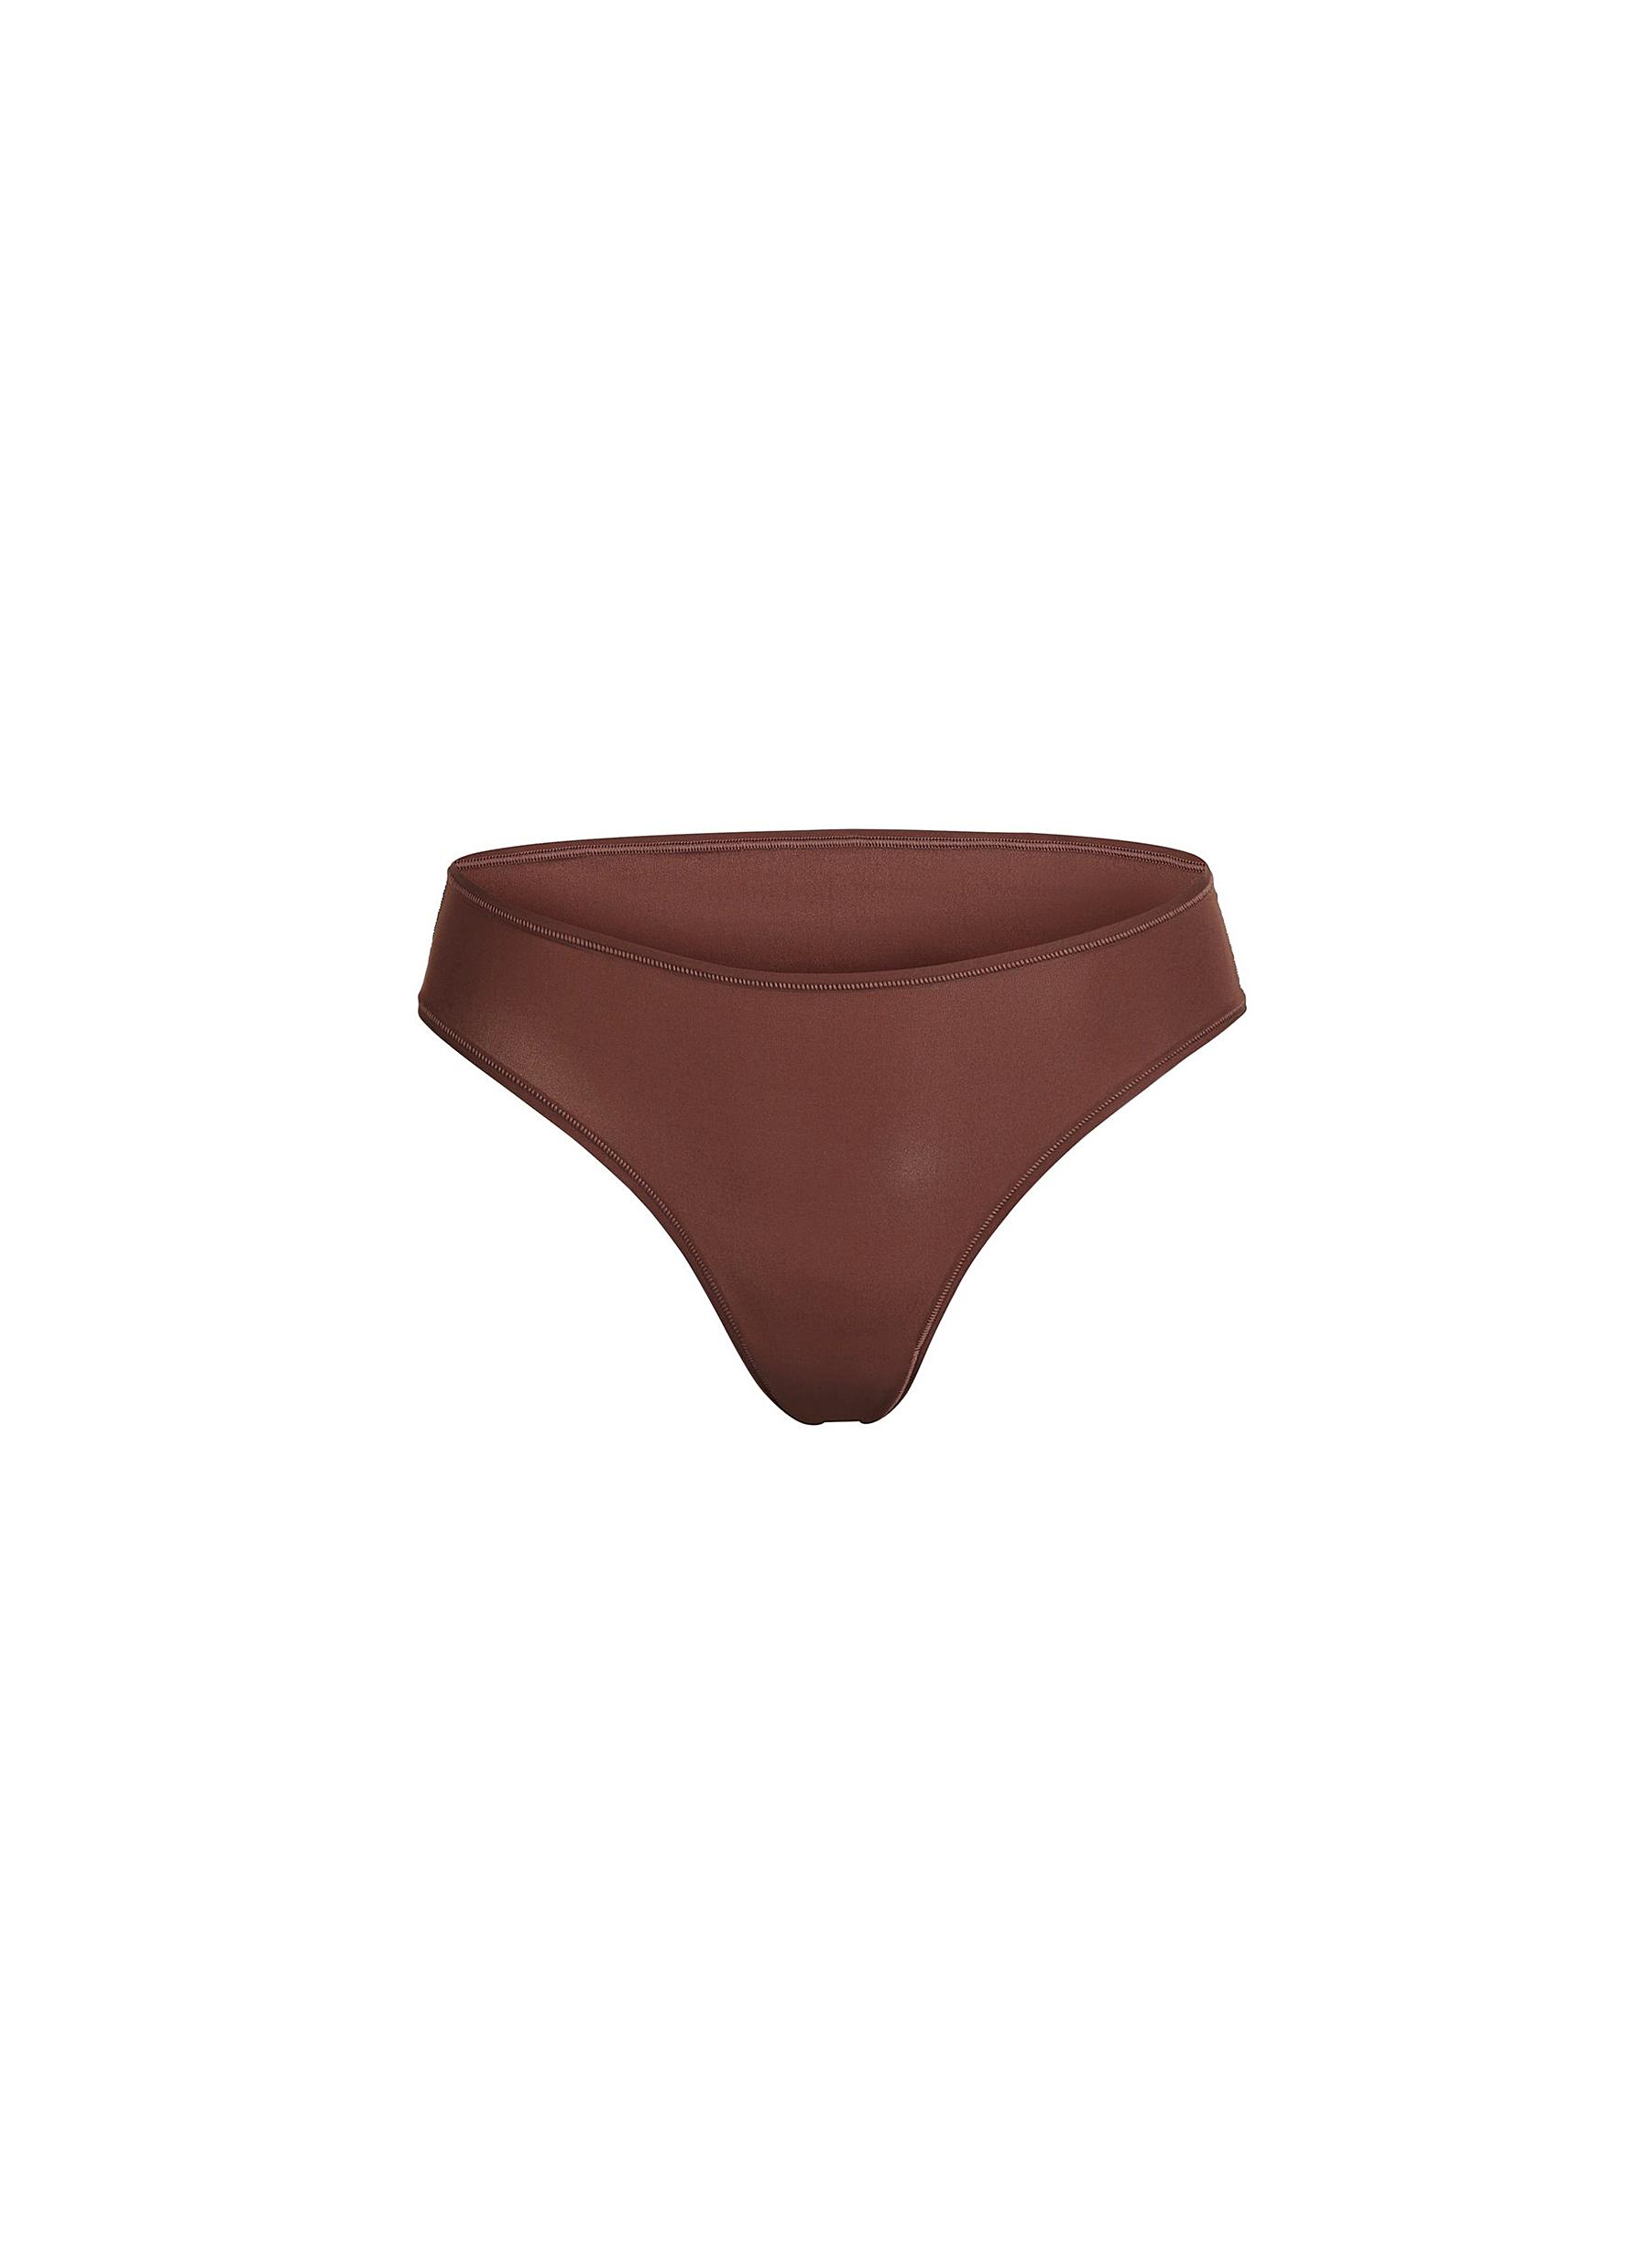 SKIMS, Fits Everybody' Cheeky Brief, COCOA, Women